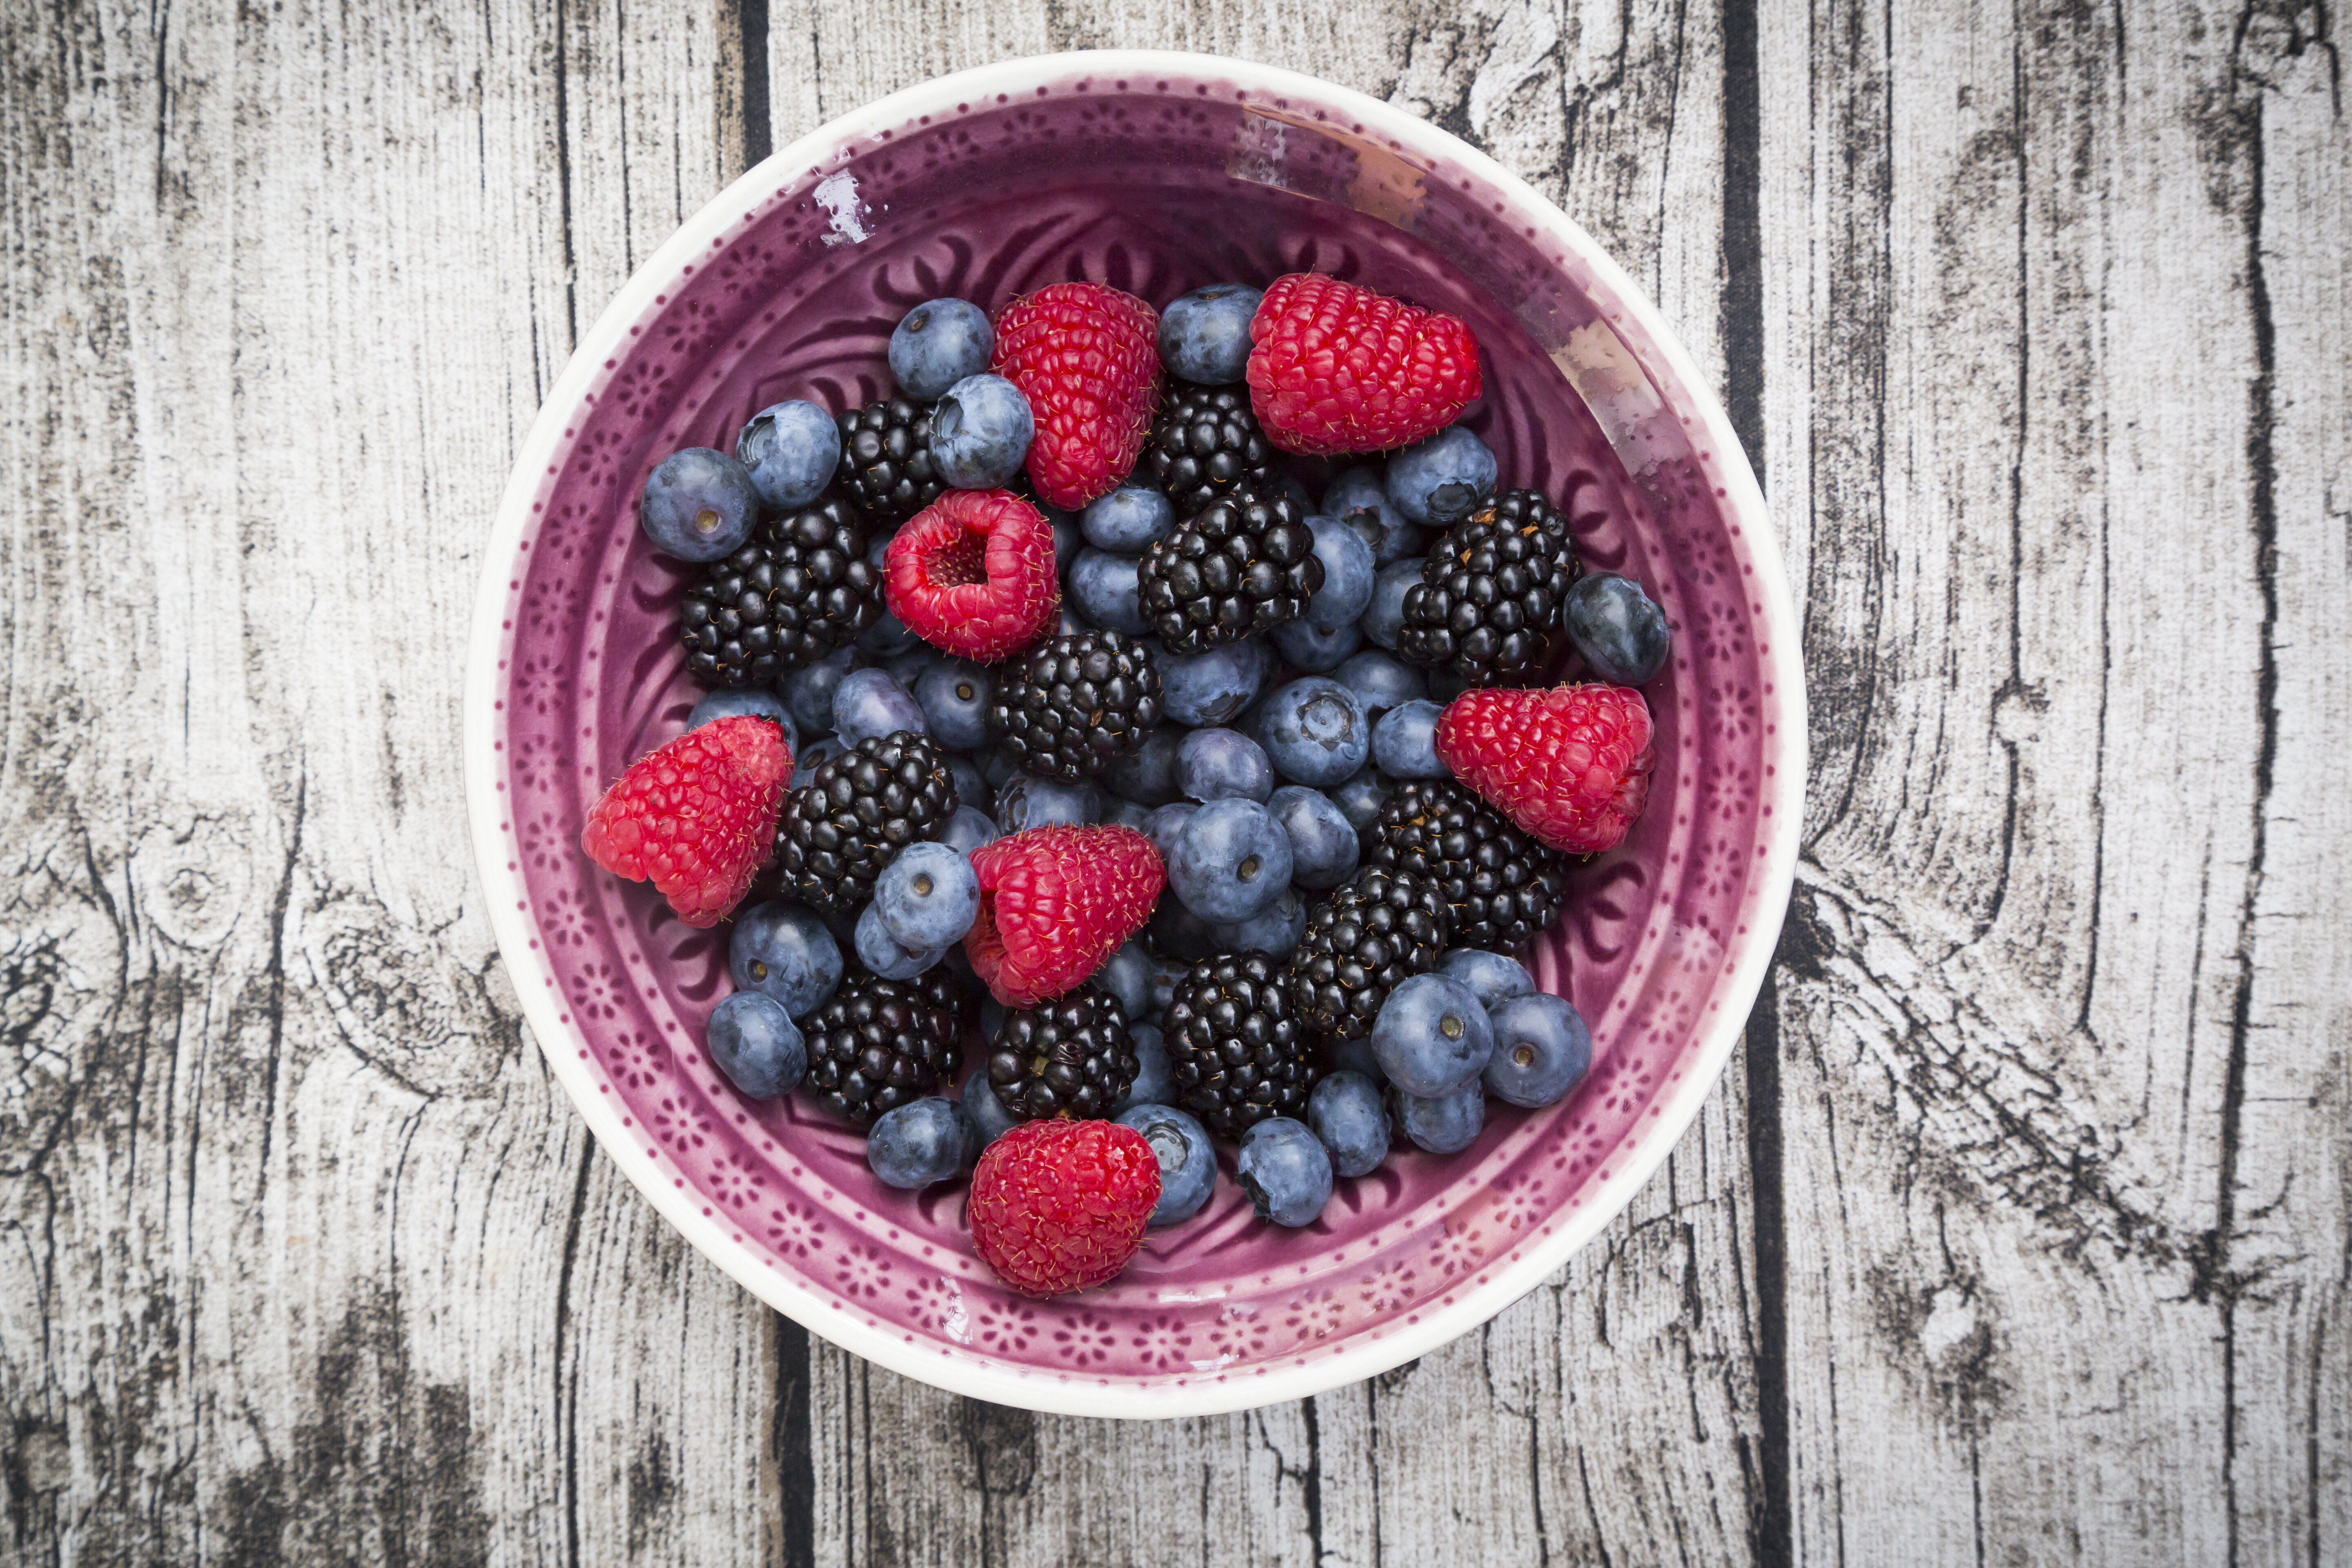 A bowl of mixed berries including raspberries, blueberries, and blackberries on a wooden surface